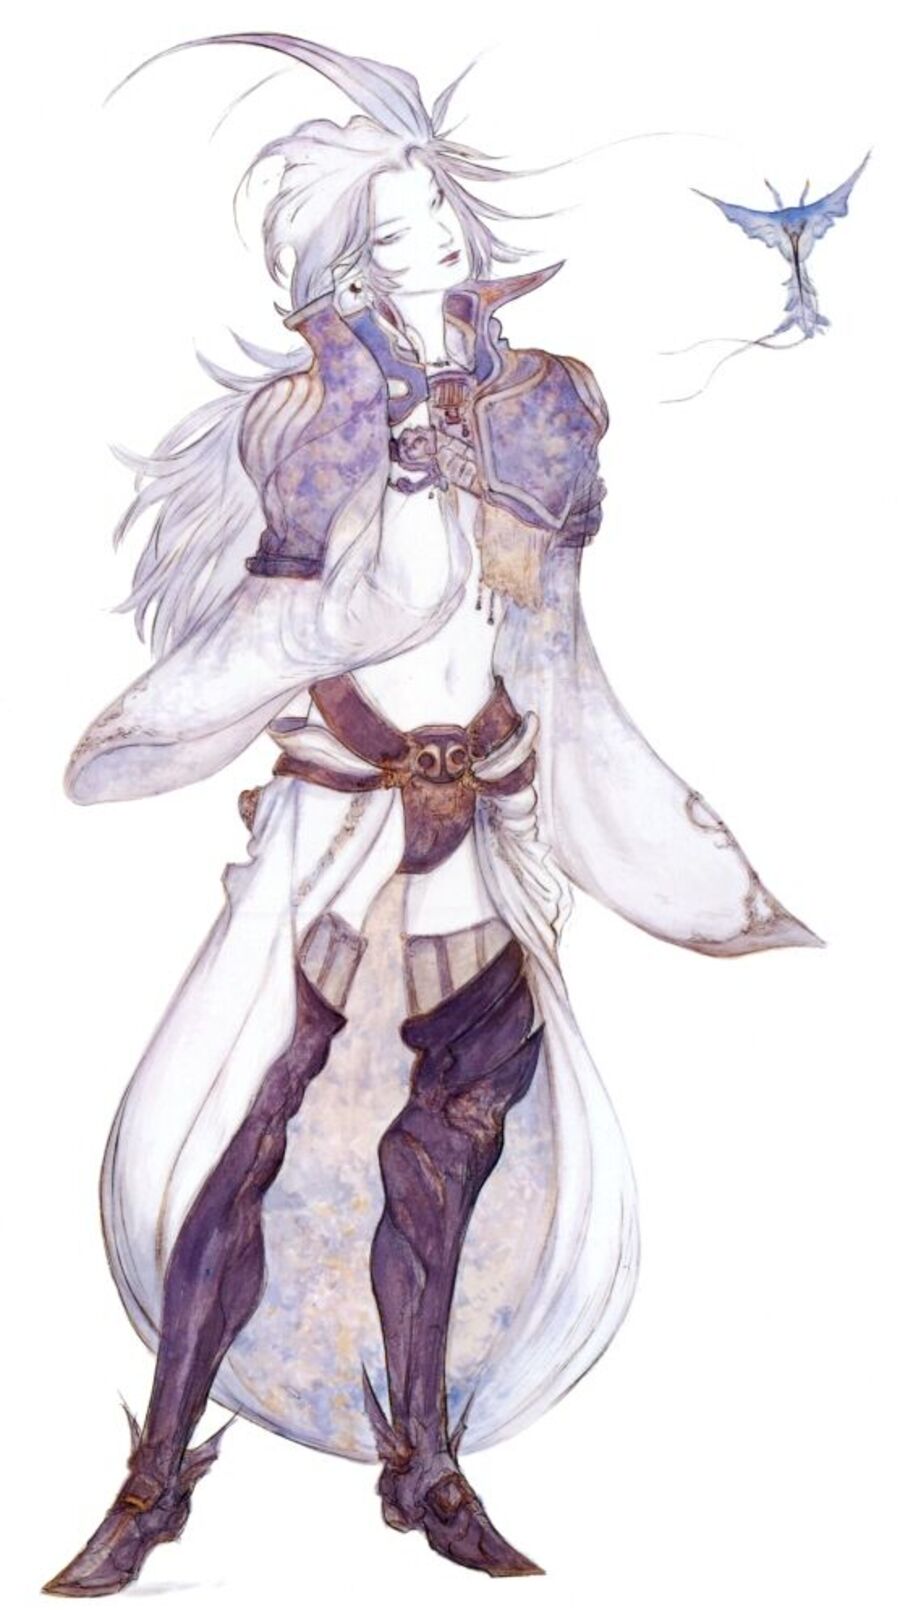 How old is Kuja?